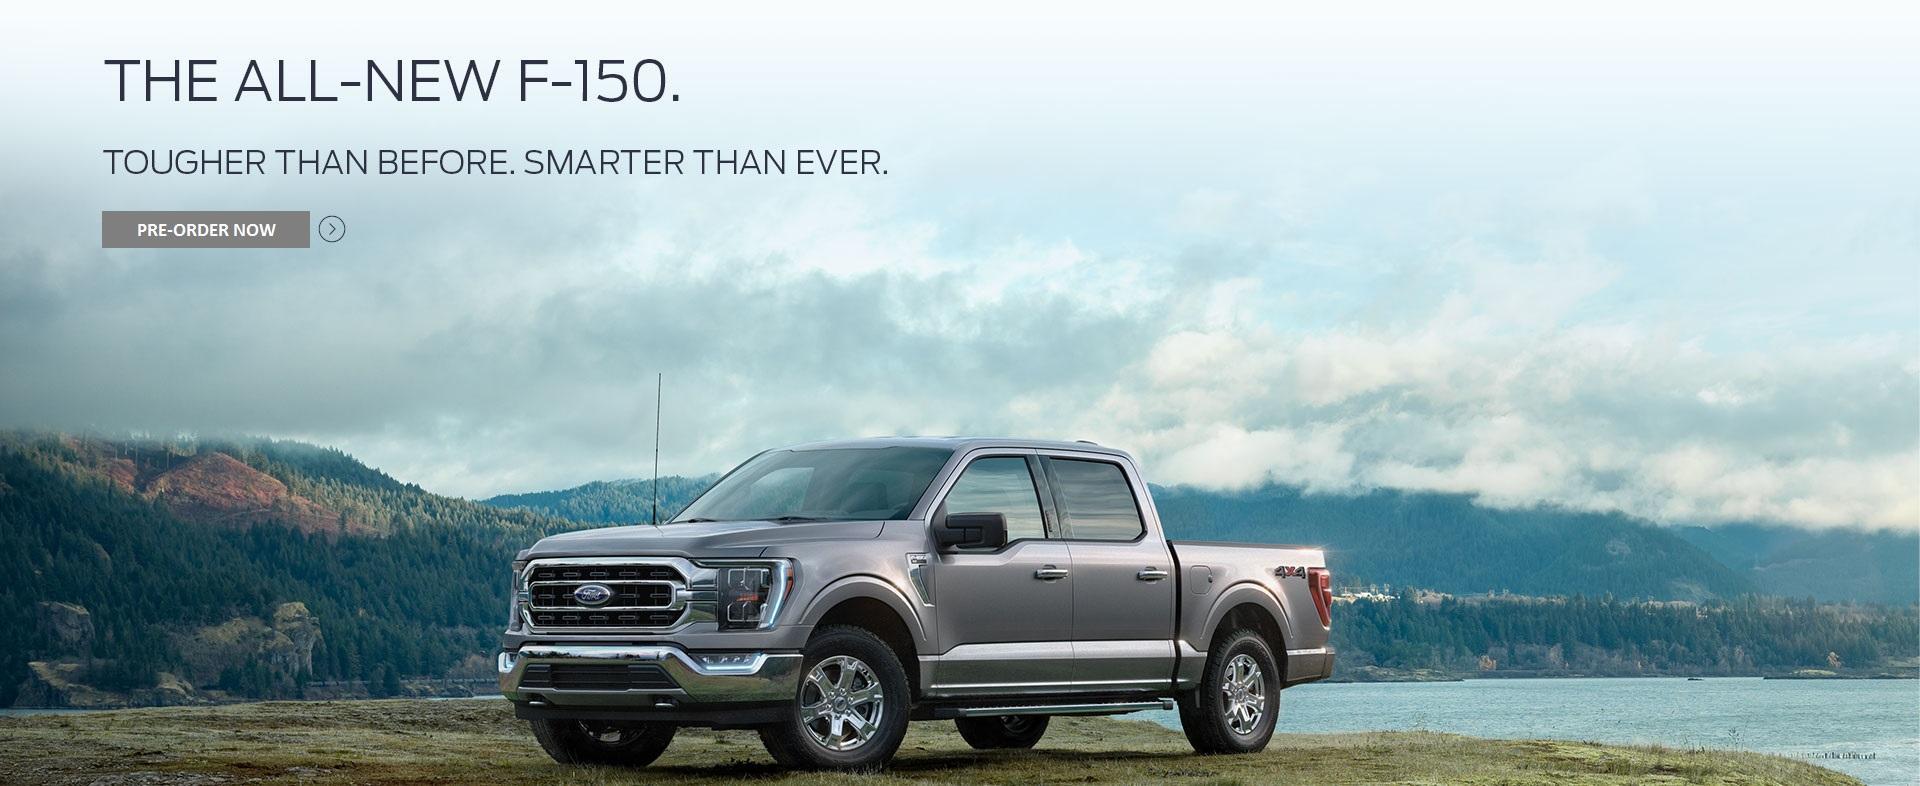 2021 Ford F-150 | Southern California Ford Dealers